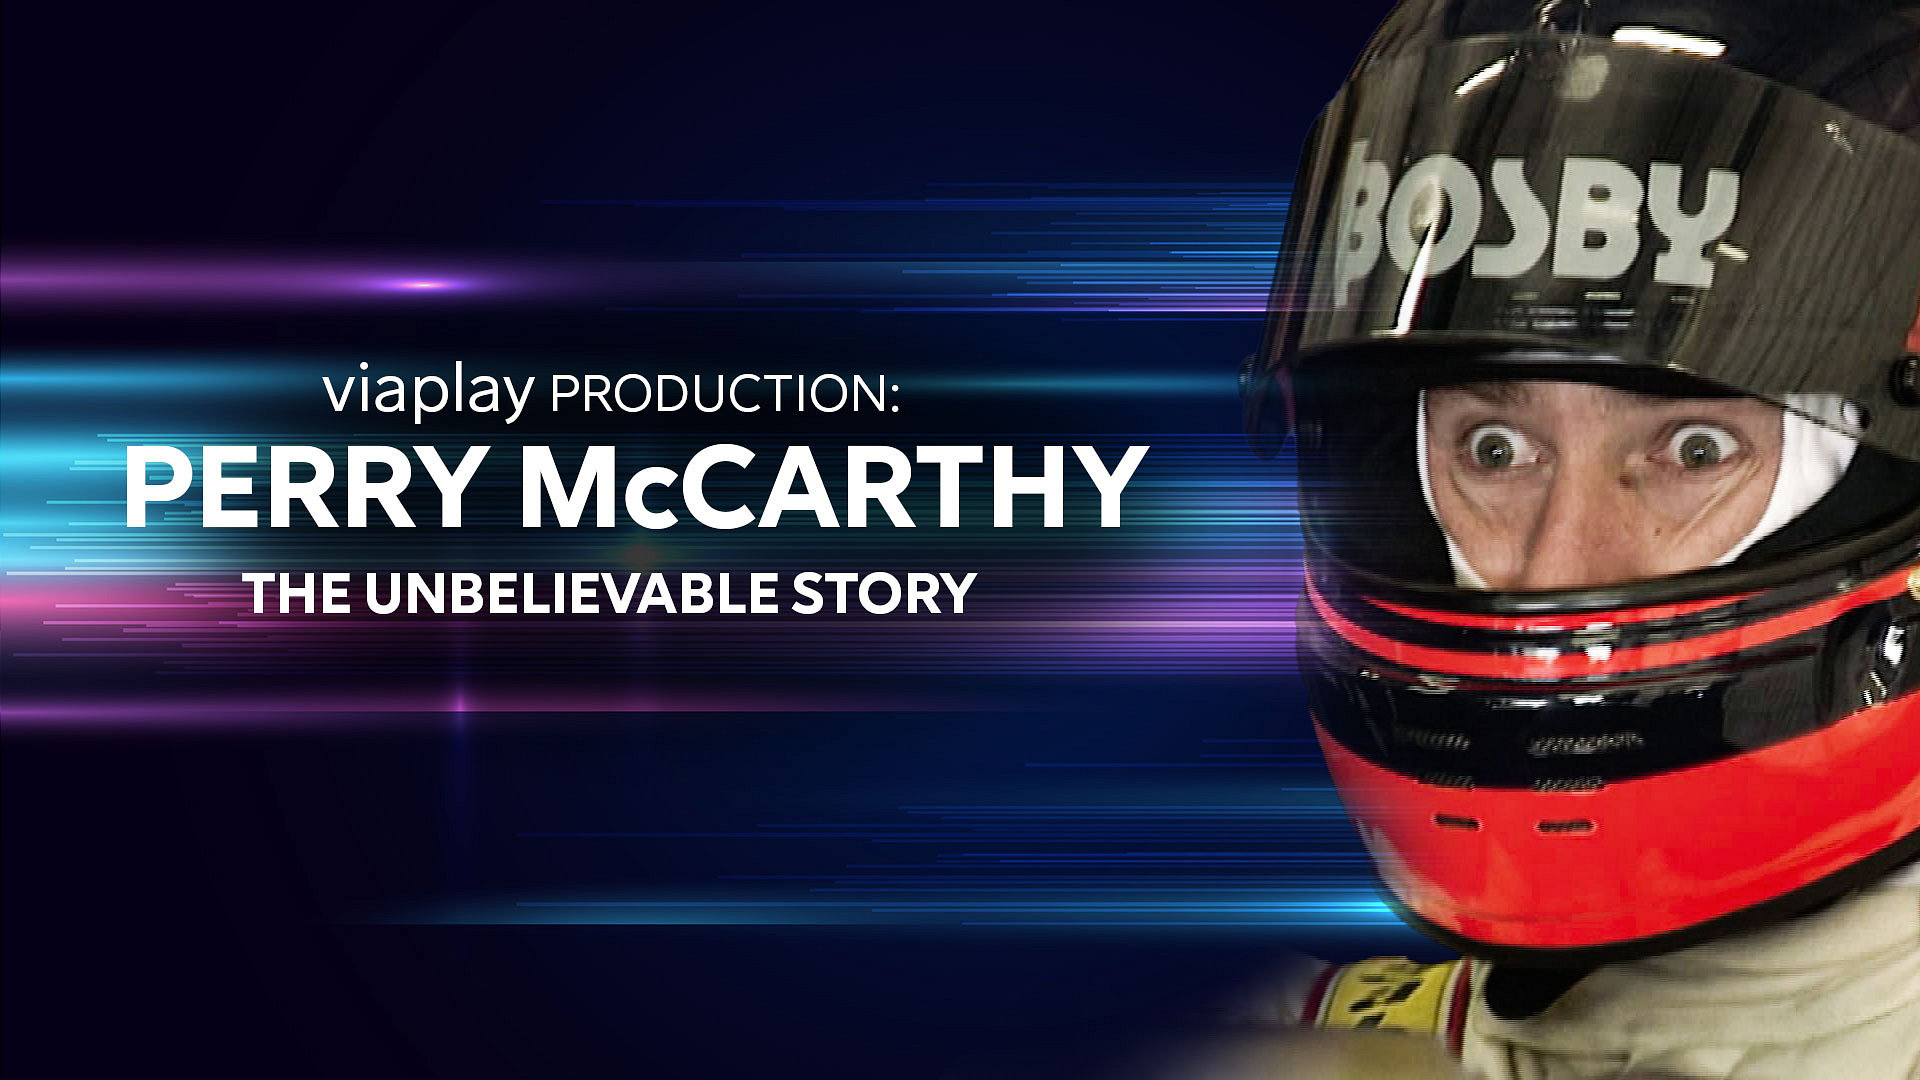 Perry McCarthy: The Unbelievable Story